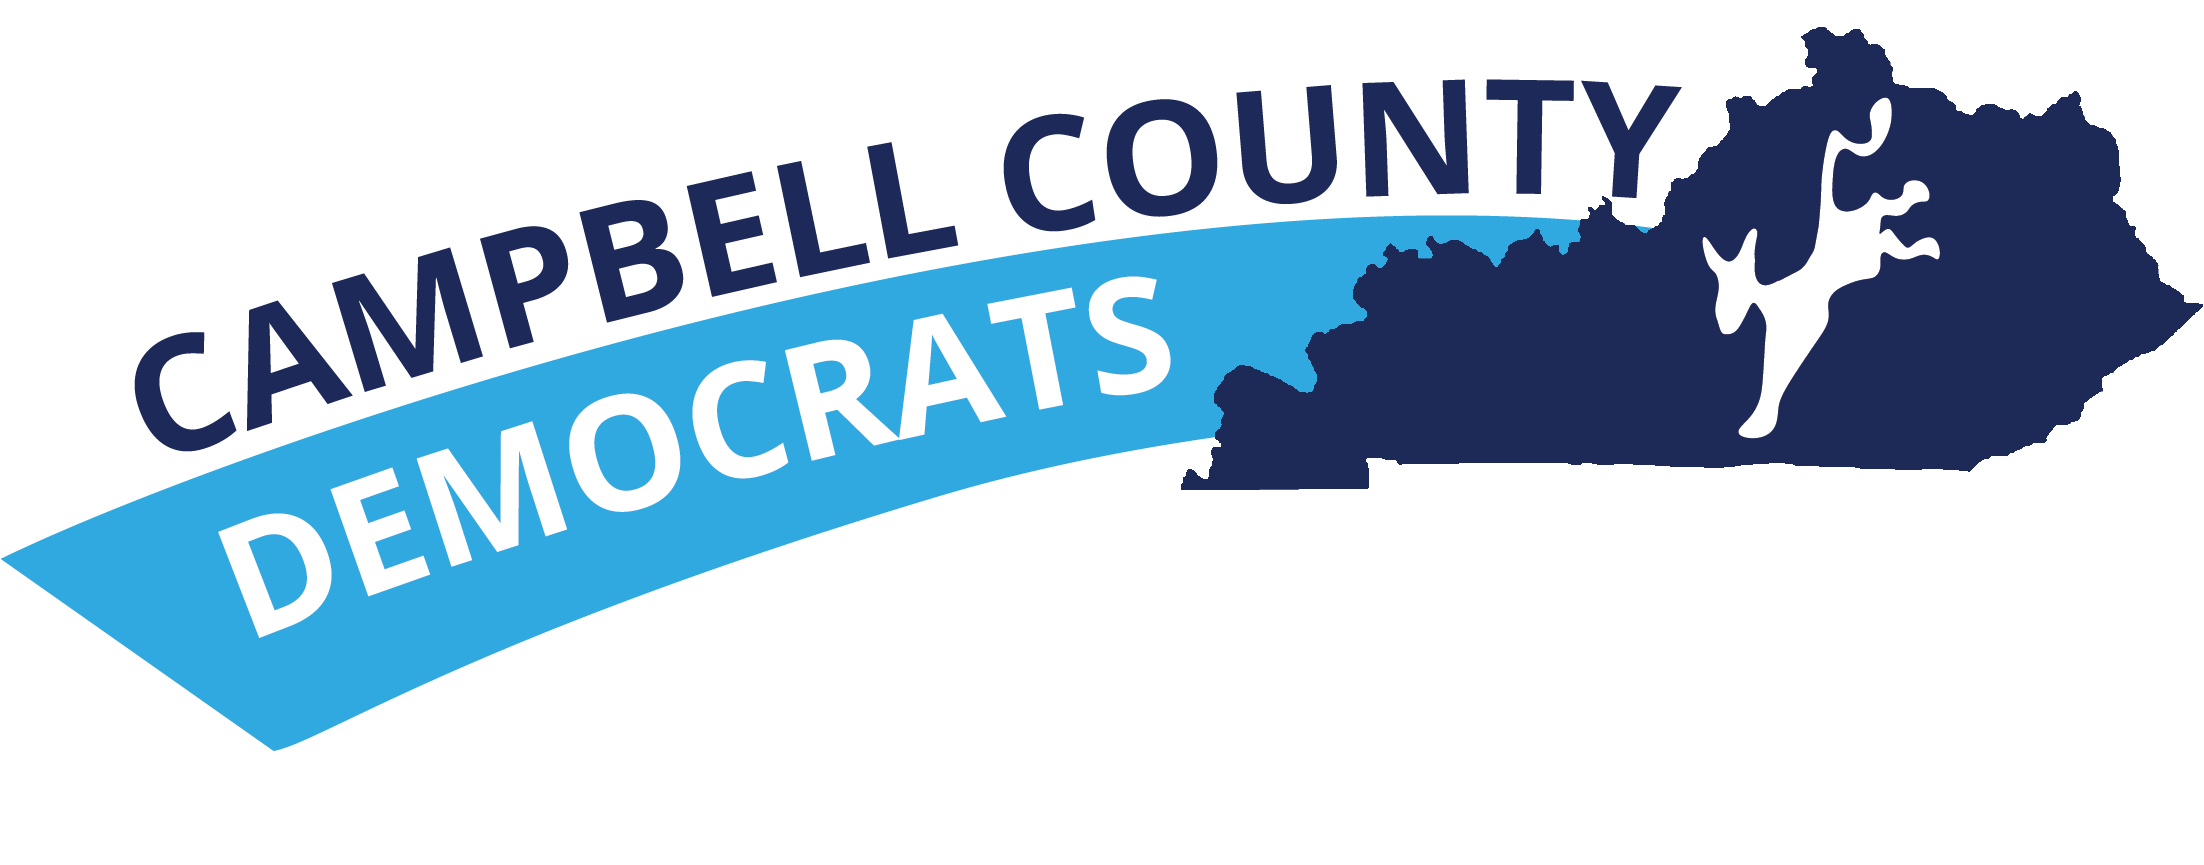 The Campbell County Democrats